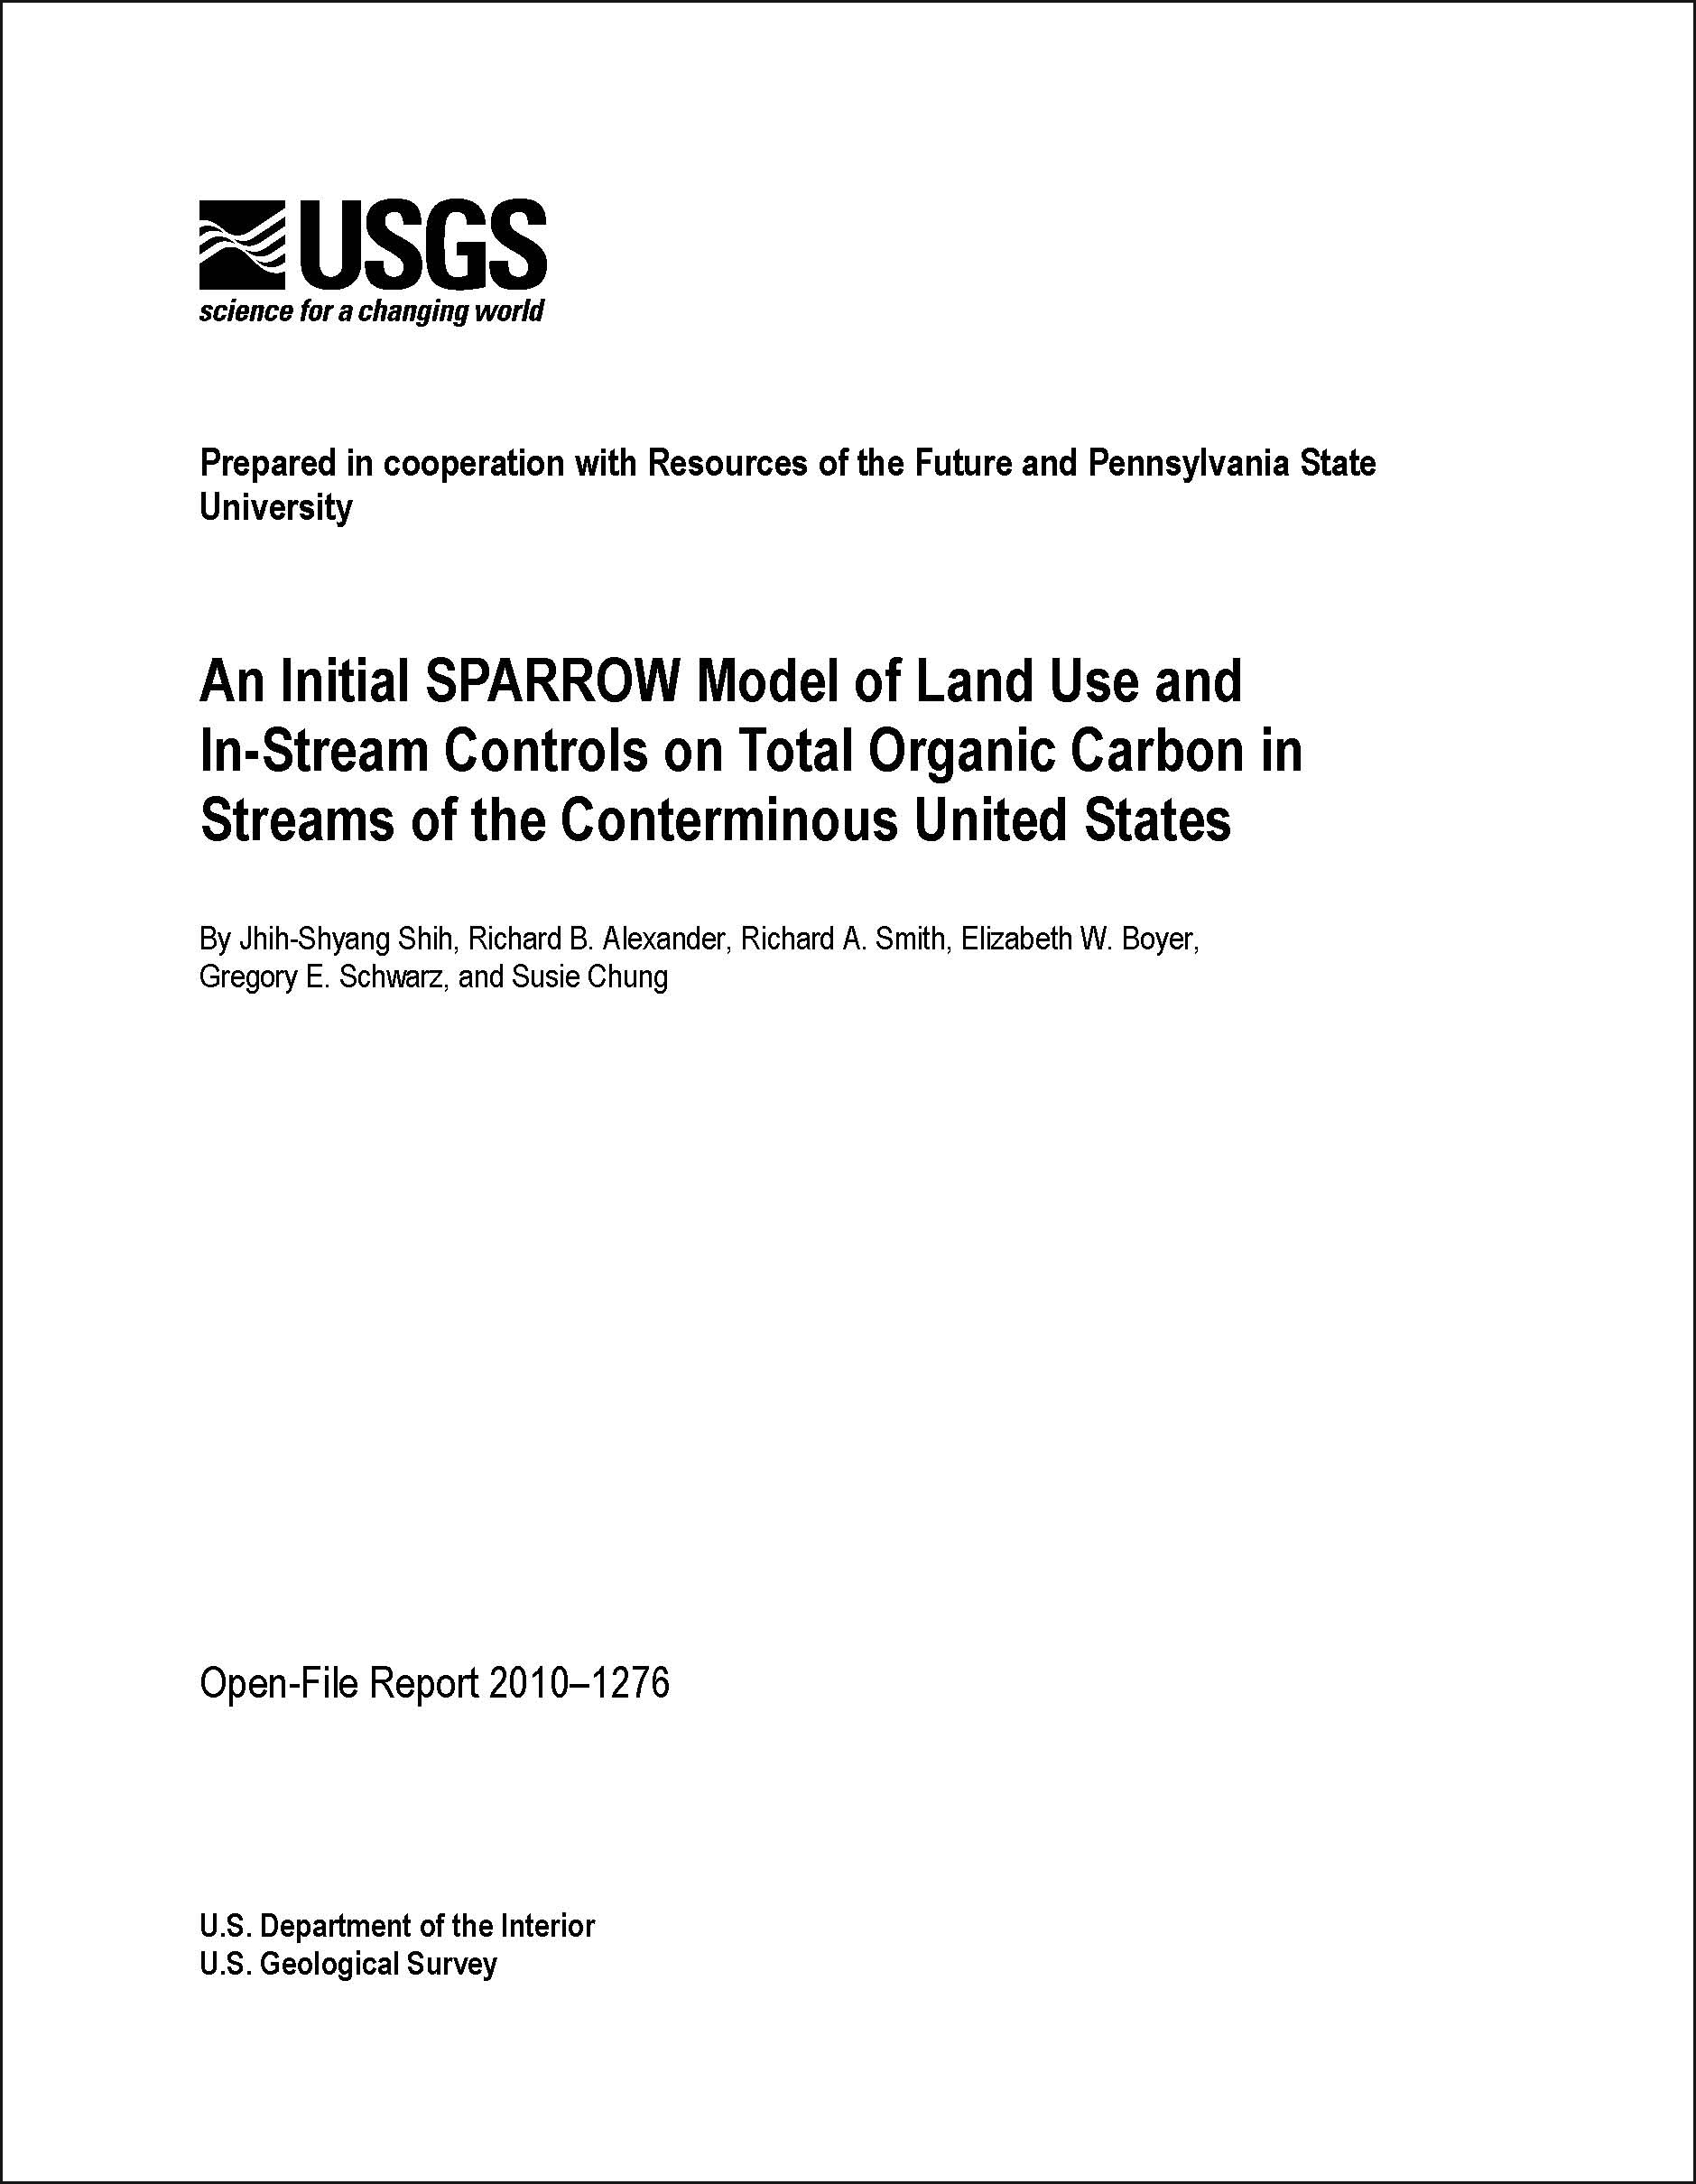 Thumbnail of and link to report PDF (3.43 MB)